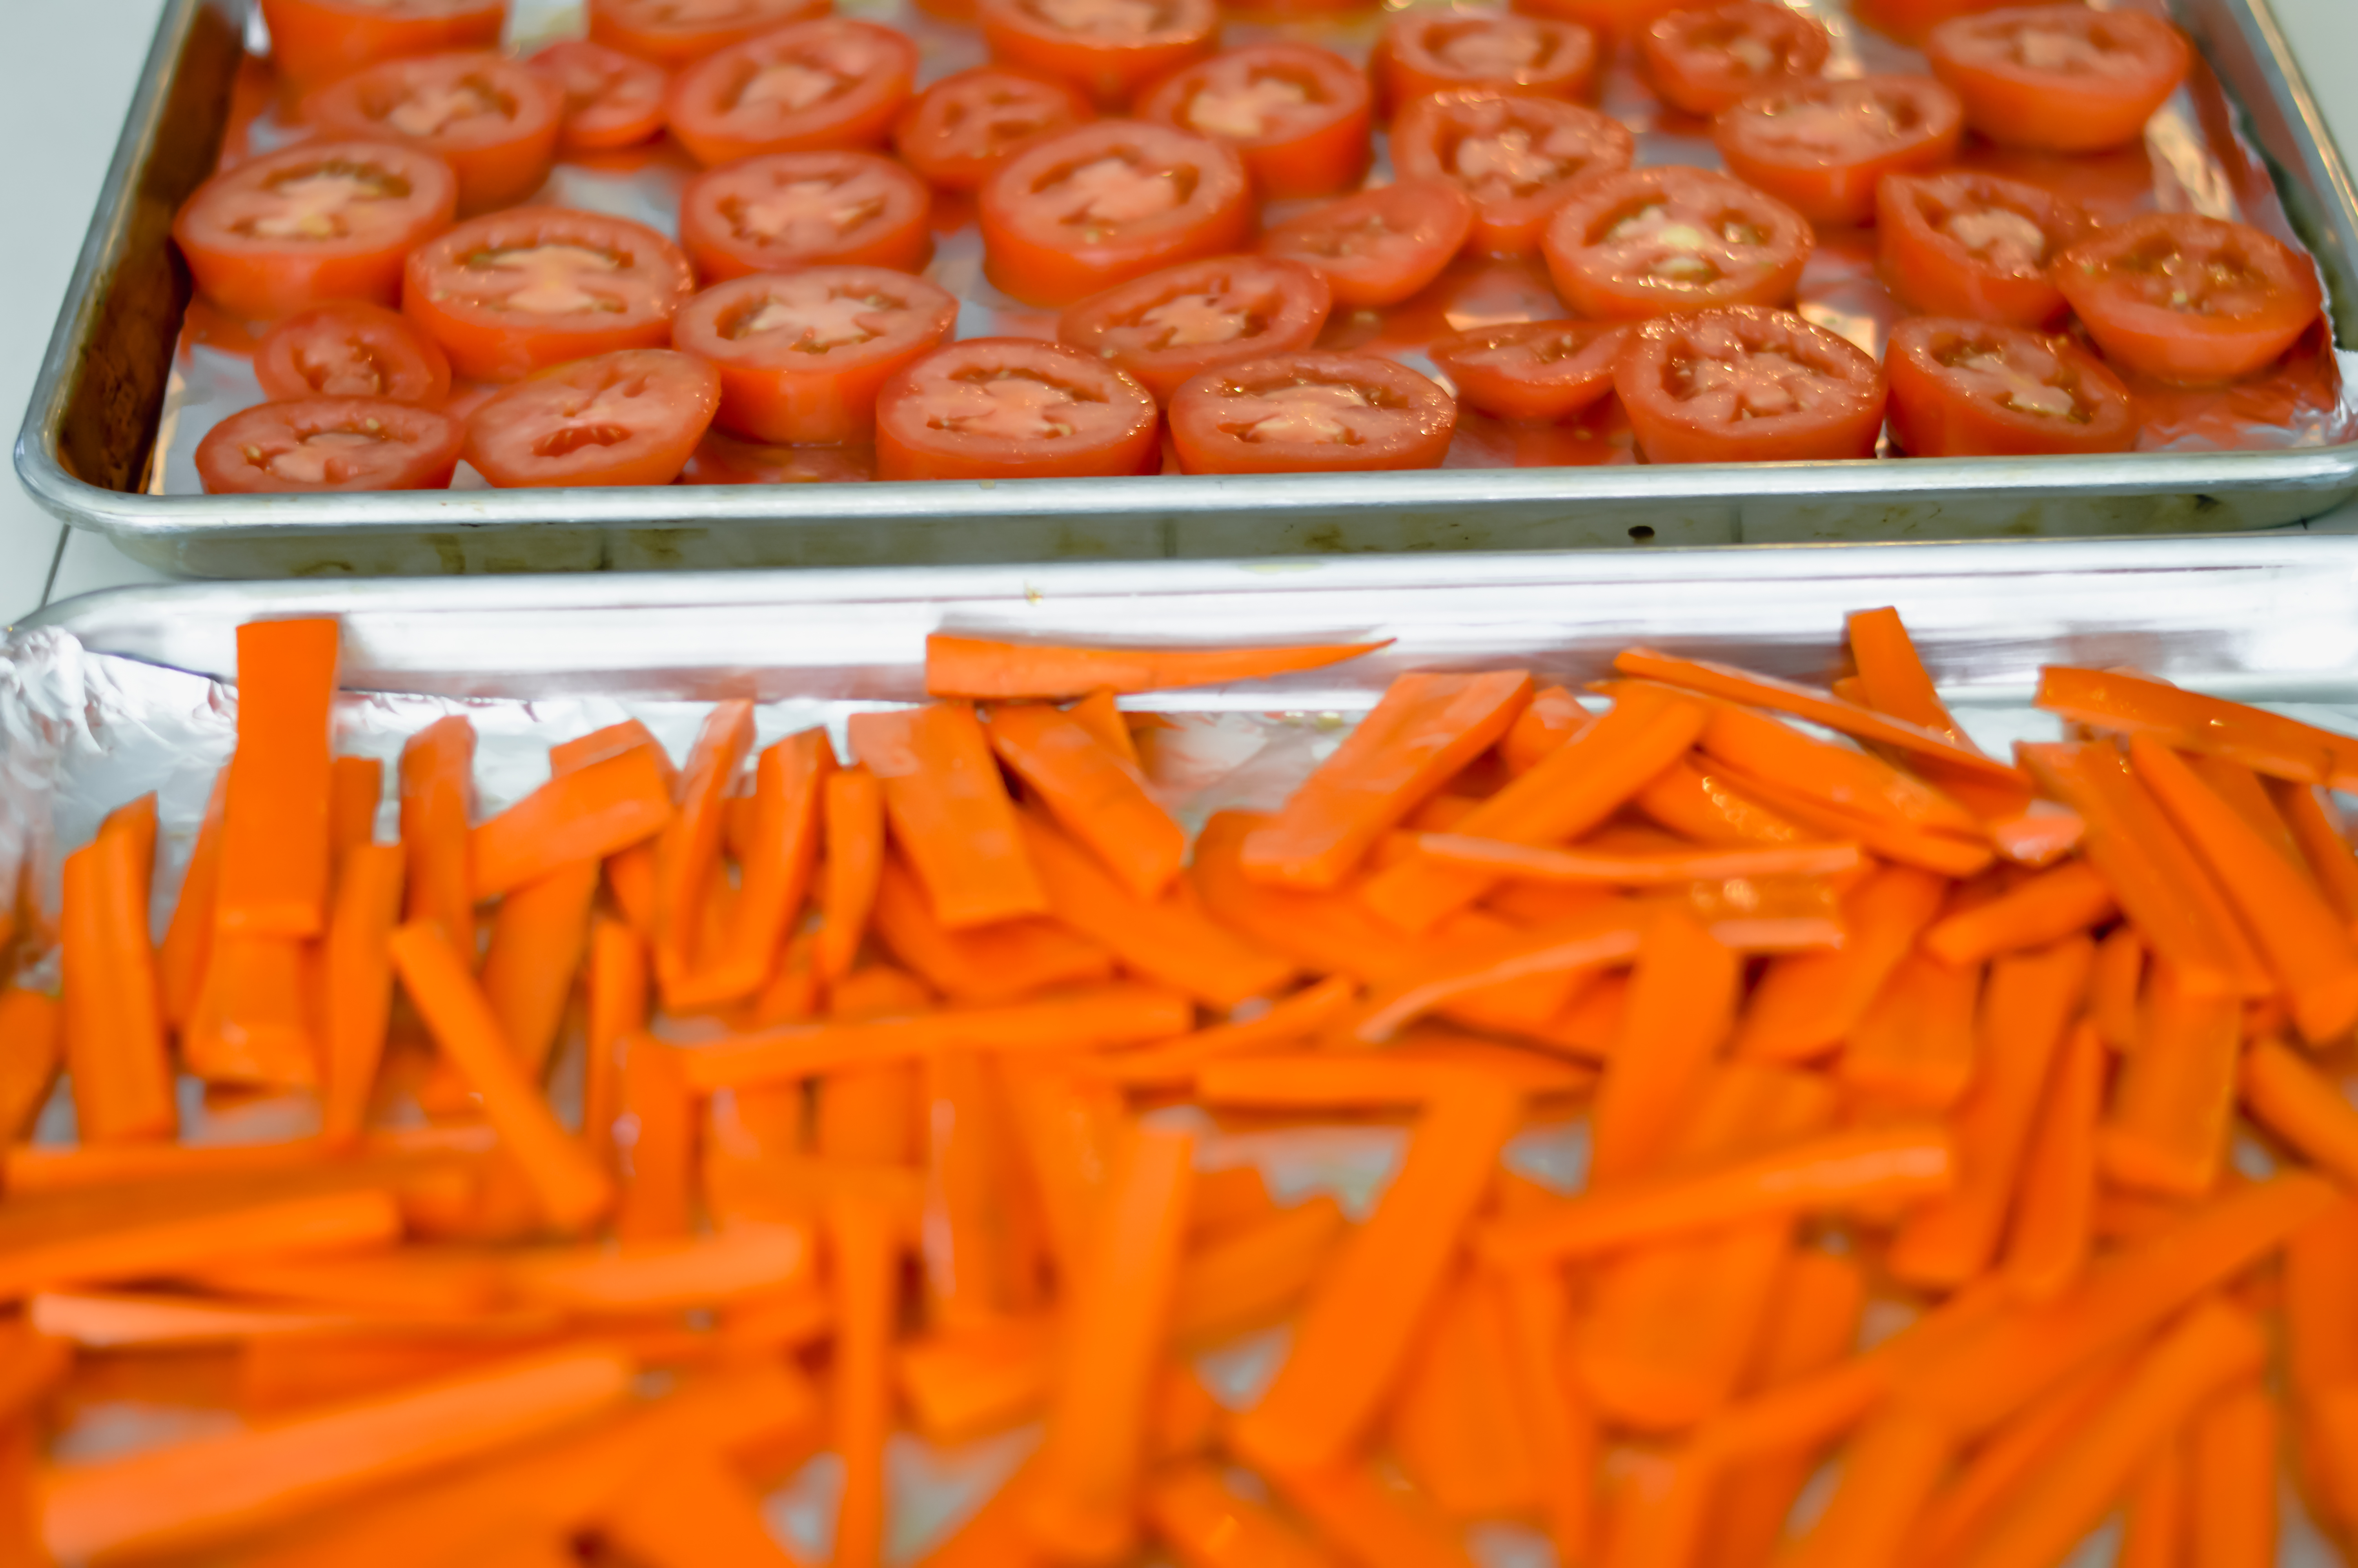 carrots and tomatoes on sheet pans waiting to be roasted